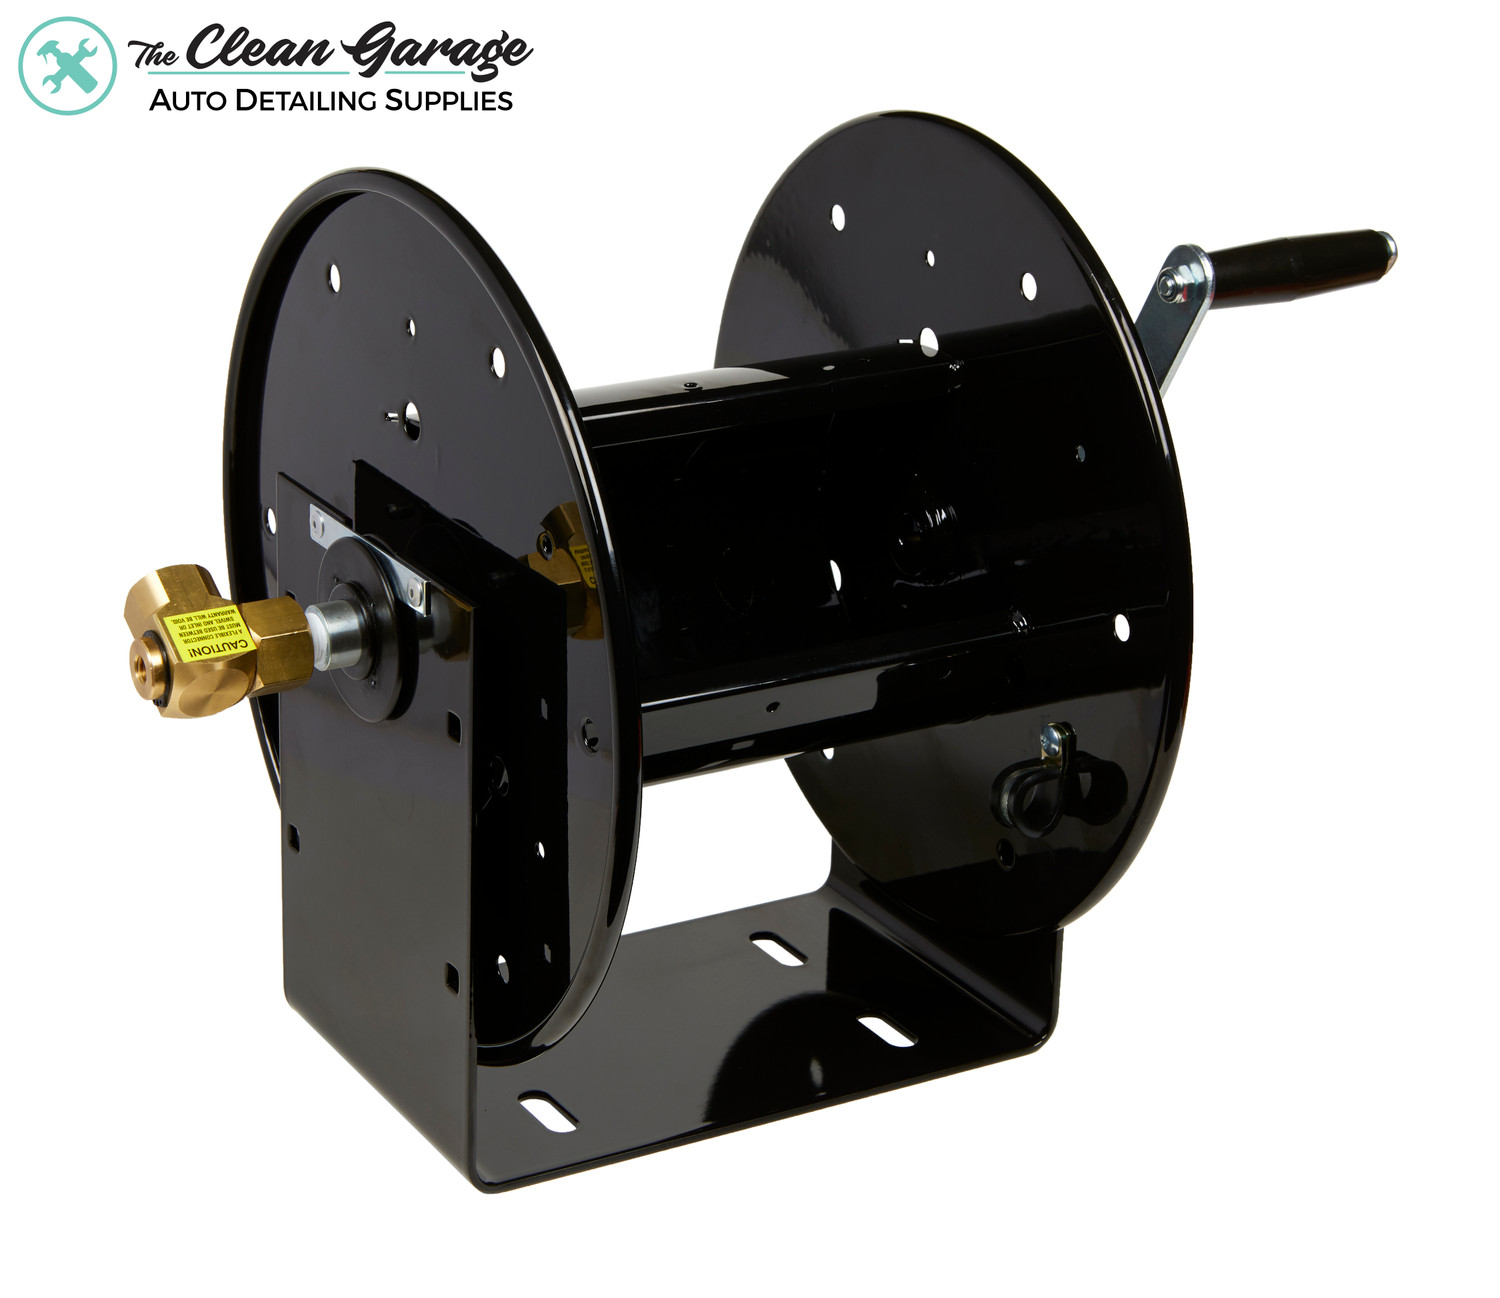 Coxreels 117-4-225 Compact Hand Crank Steel Hose Reel - 4,000 PSI - Holds  1/2 x 225' Length Hose - Perfect for Air Compressor, Garden, Pressure